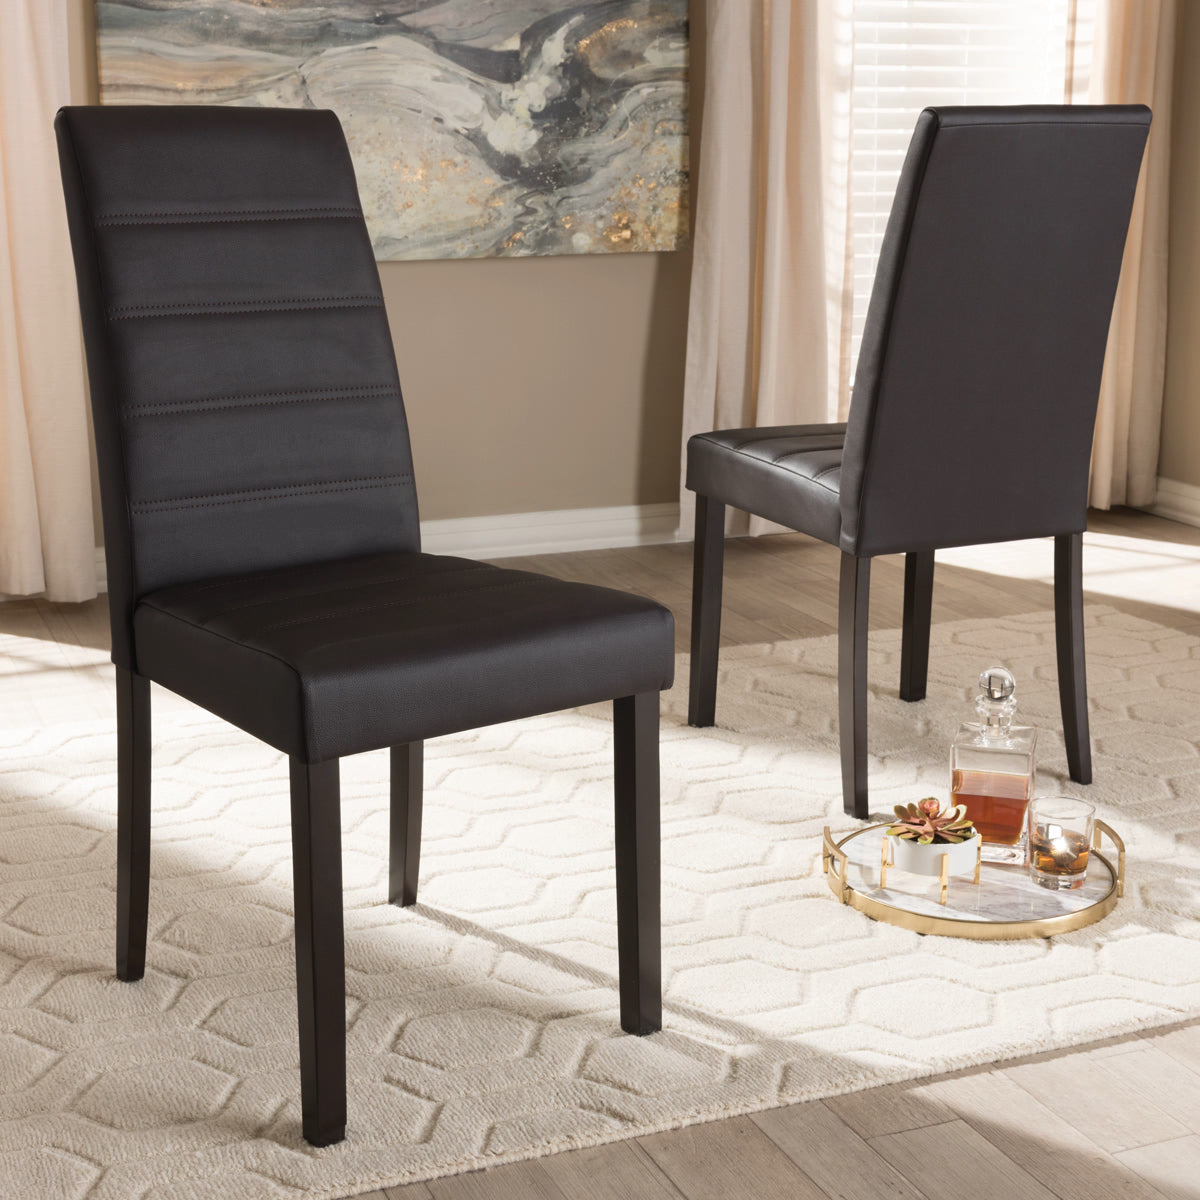 Baxton Studio Lorelle Modern and Contemporary Brown Faux Leather Upholstered Dining Chair (Set of 2) Baxton Studio-dining chair-Minimal And Modern - 6